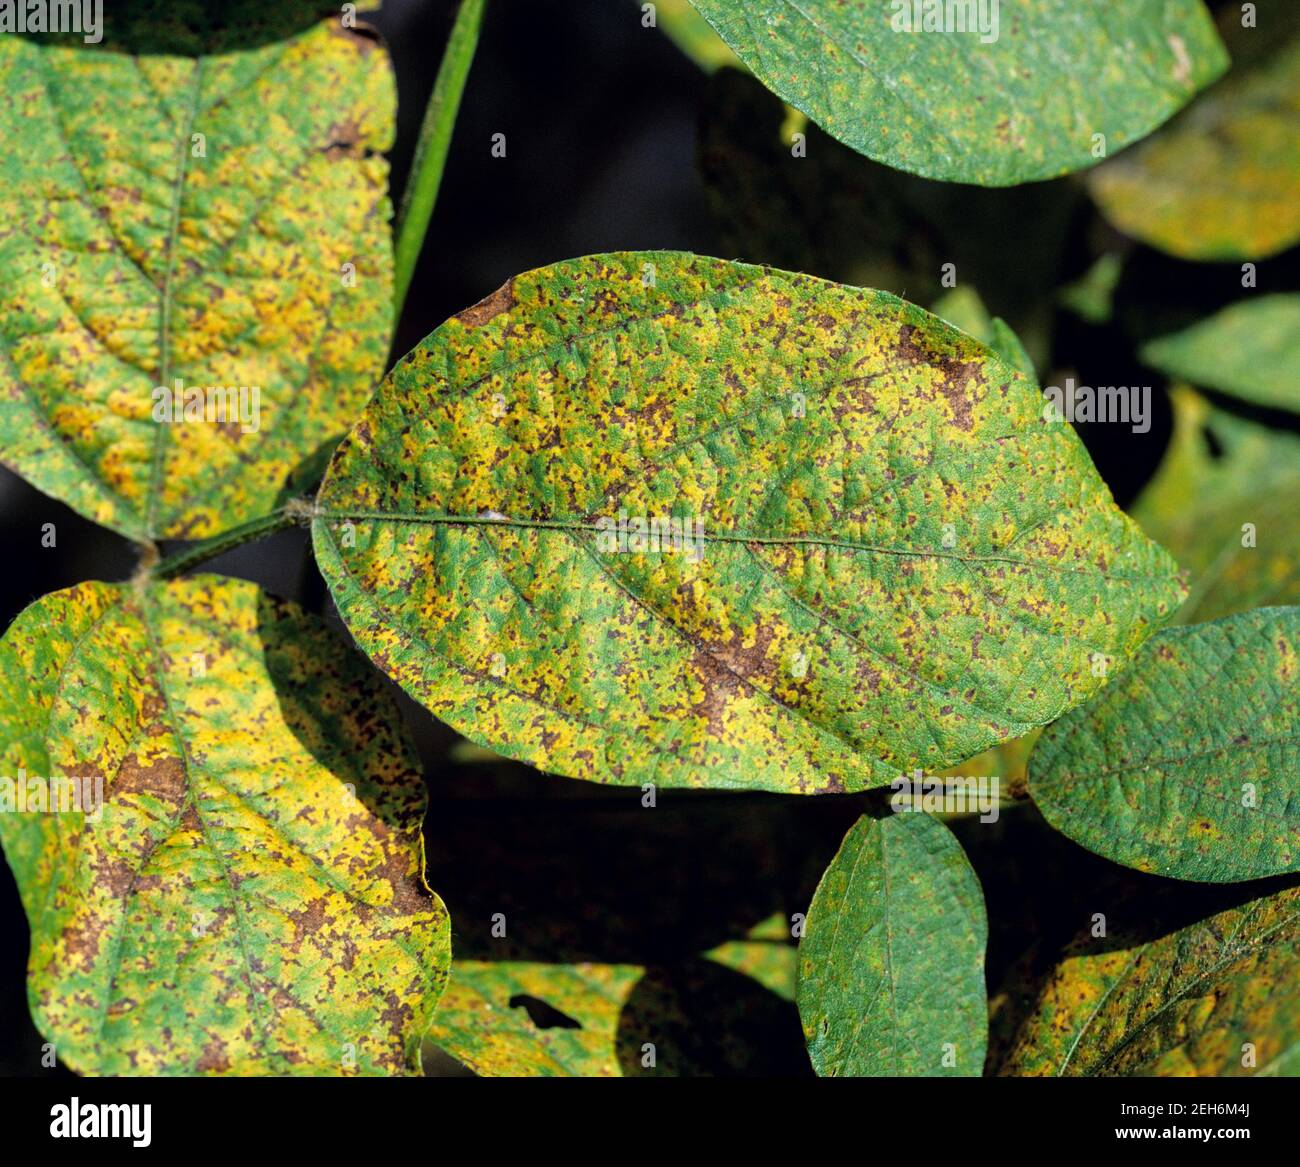 Asian soybean rust (Phakopsora pachyrizi) pustules on the under surface of a soybean leaf, Thailand Stock Photo